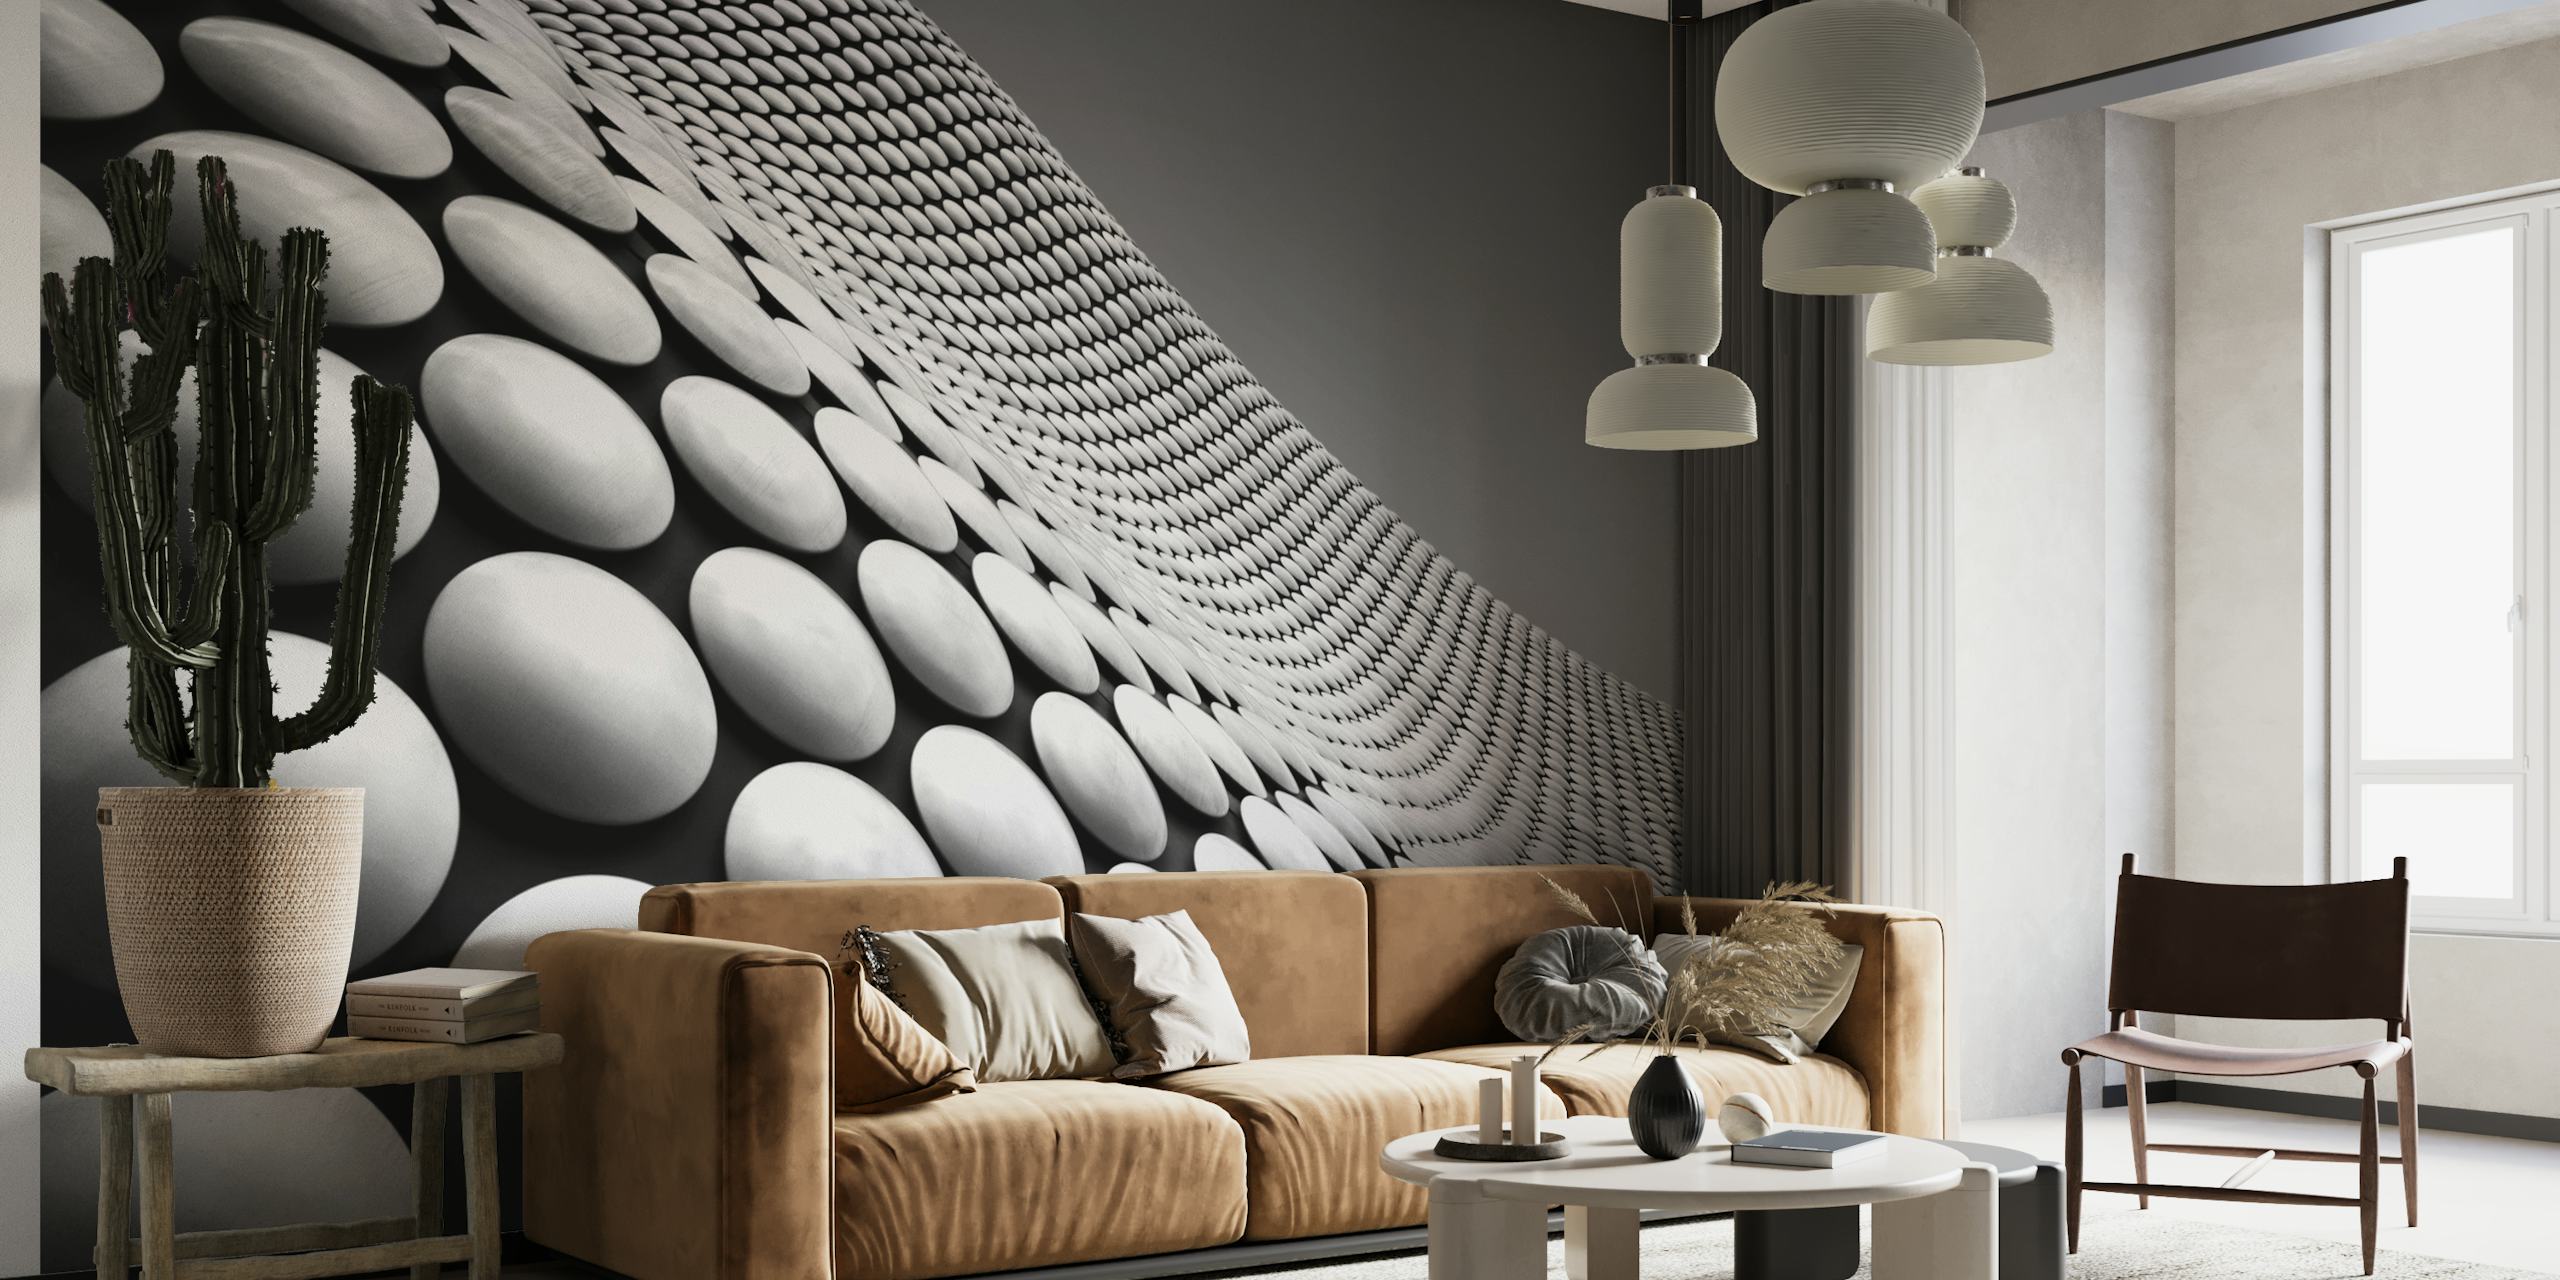 Abstract black and white wall mural with 3D curved pattern design from happywall.com